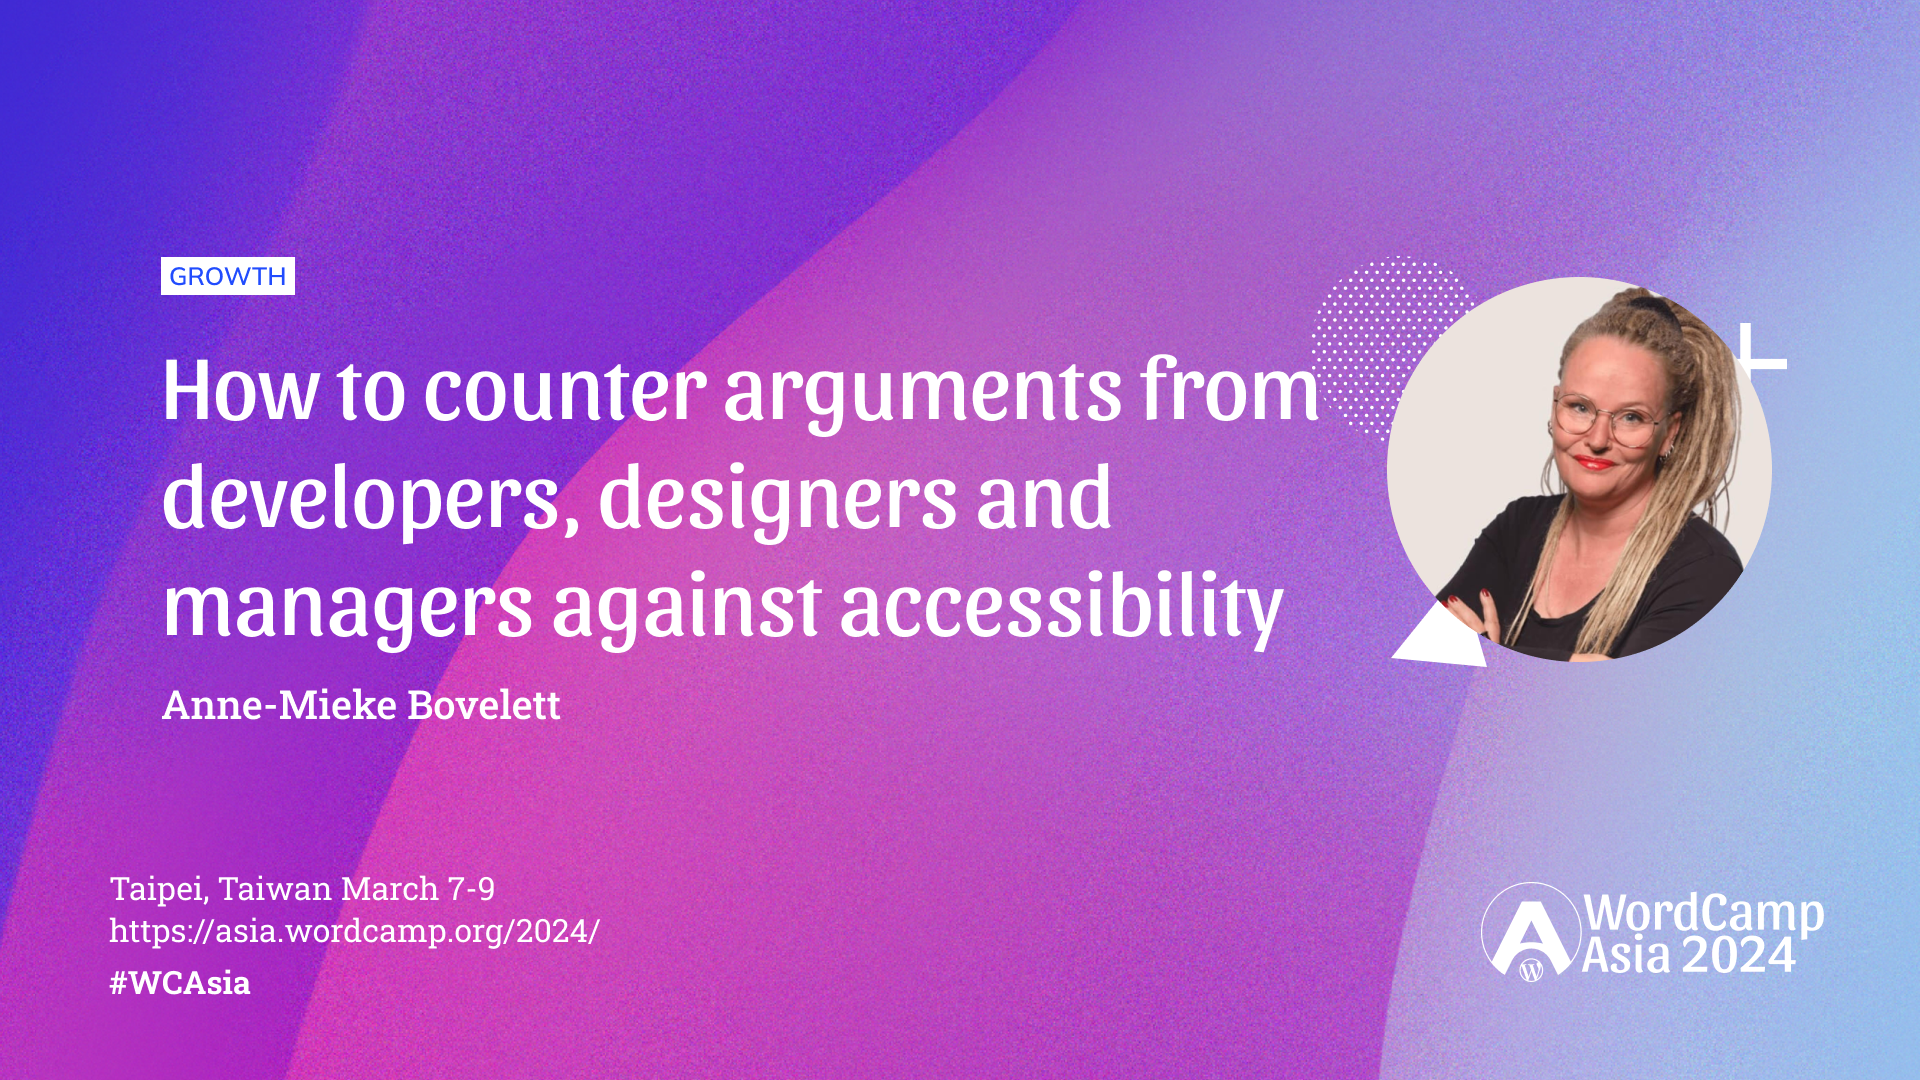 How to counter arguments from developers, designers and managers against accessibility